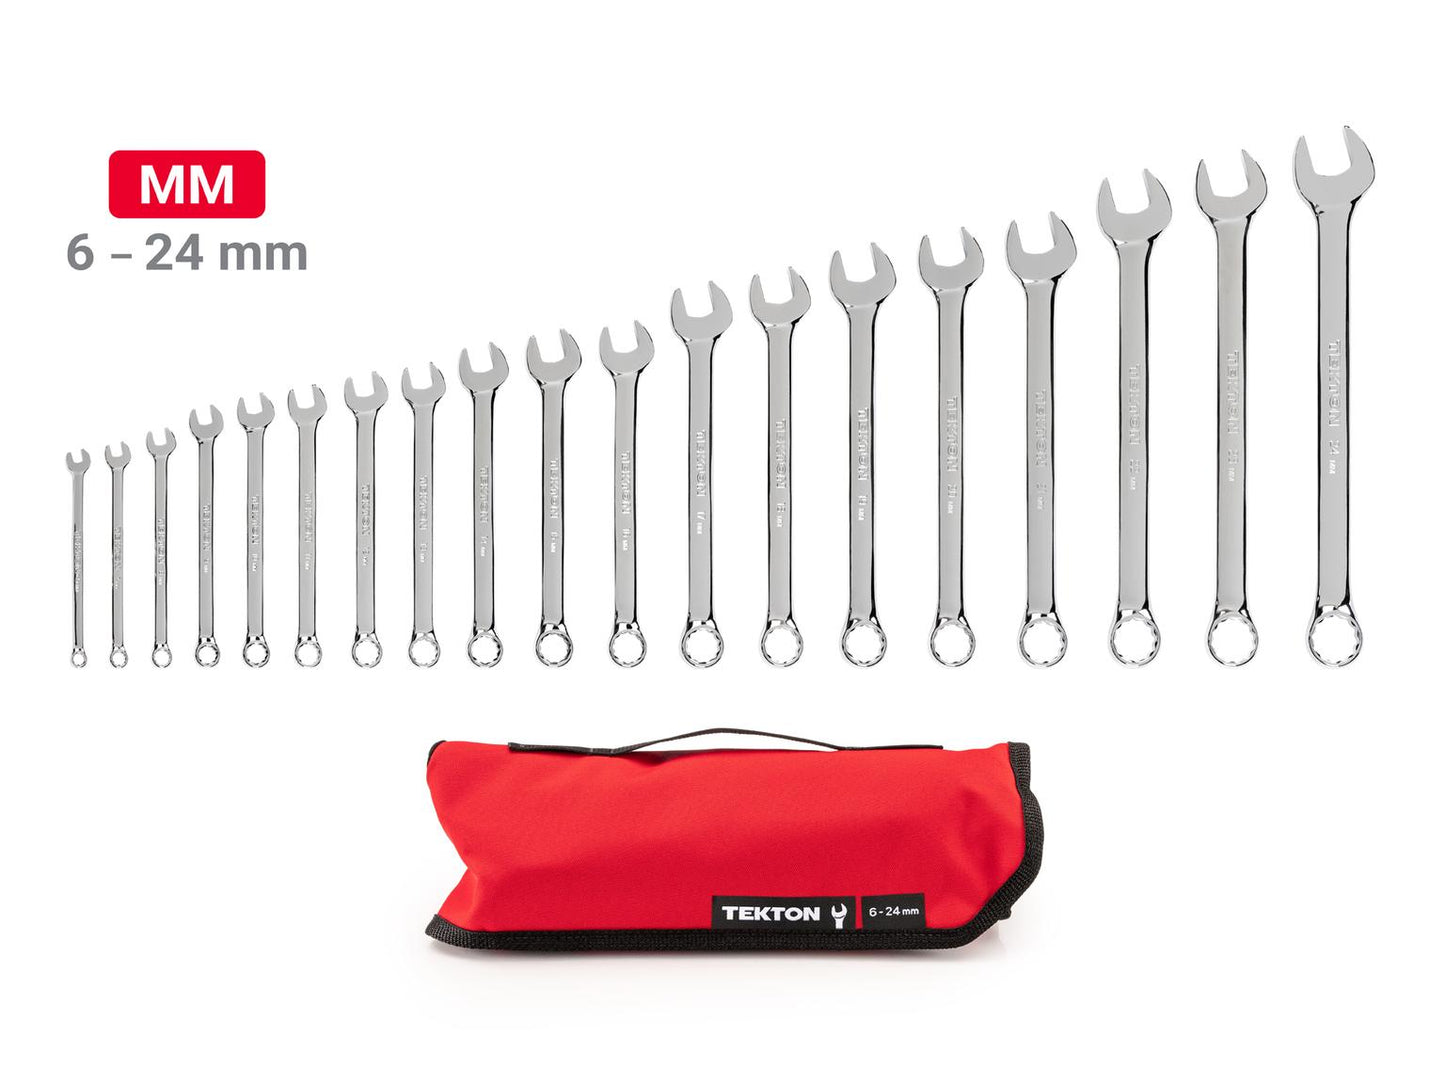 Tekton 19pc Metric Wrench Set 6 - 24 mm with Pouch (WCB94202)